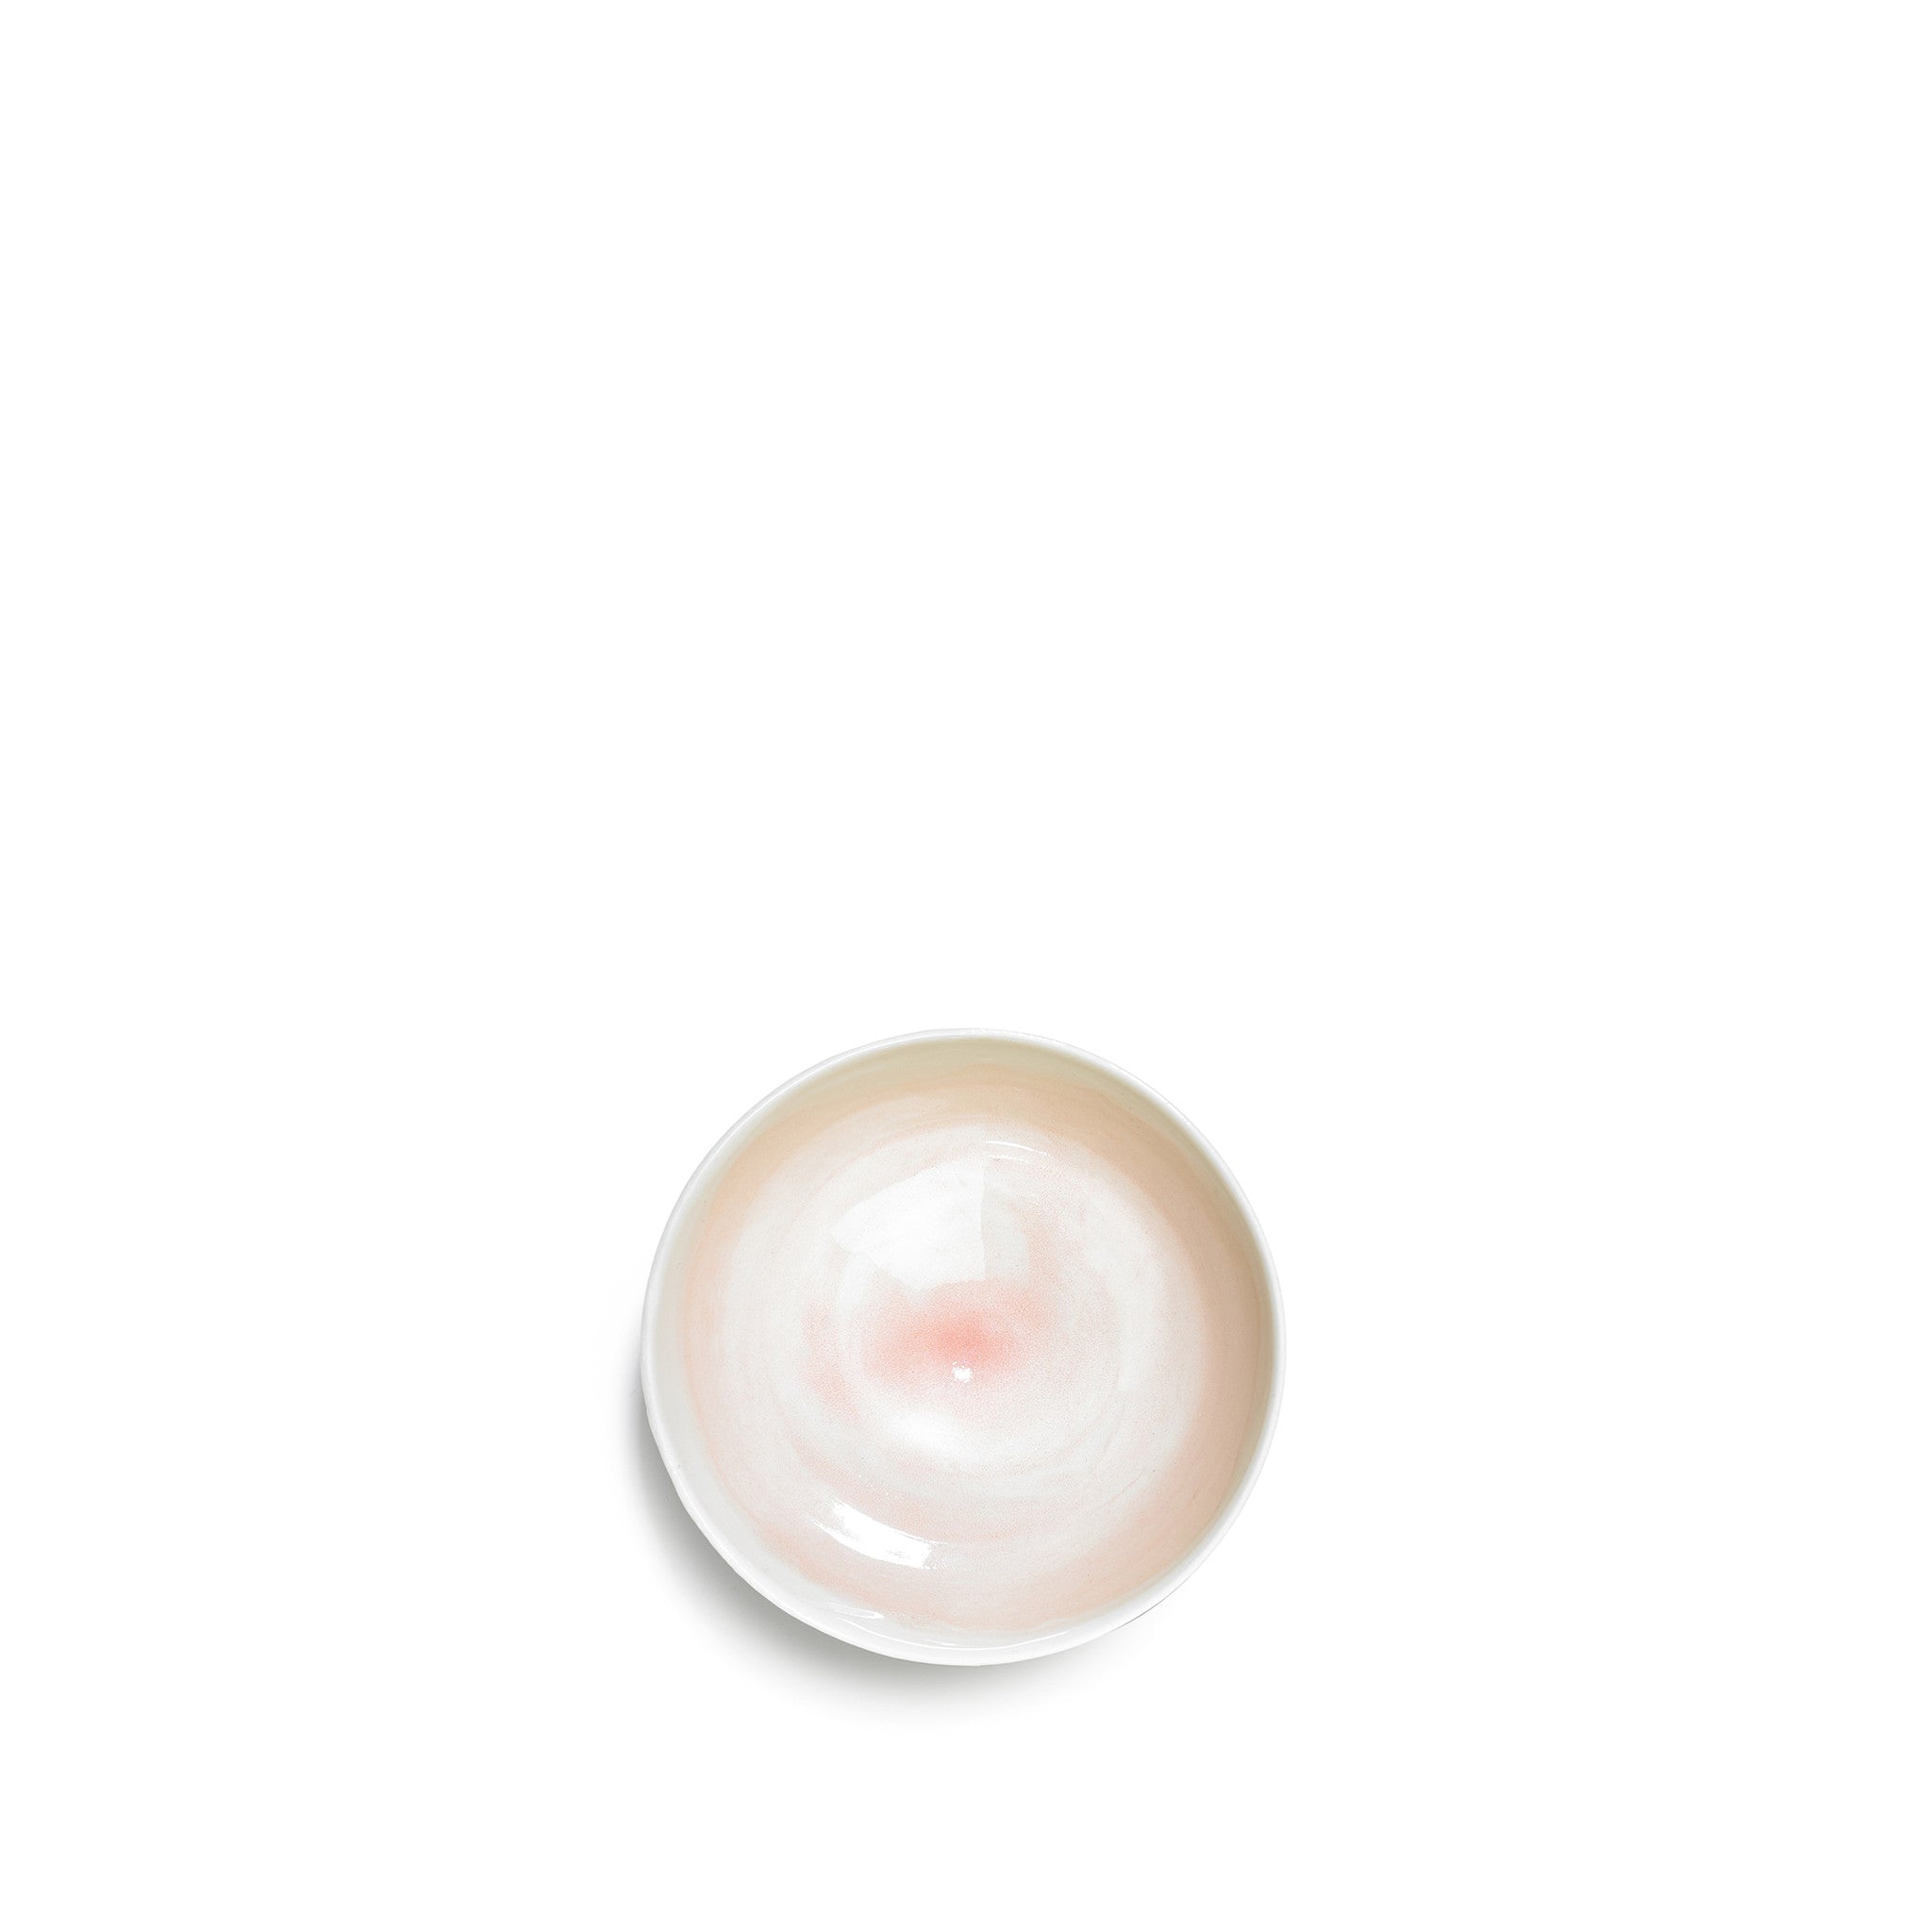 Small Soft Pink Porcelain Bowl with White Edge, 8cm